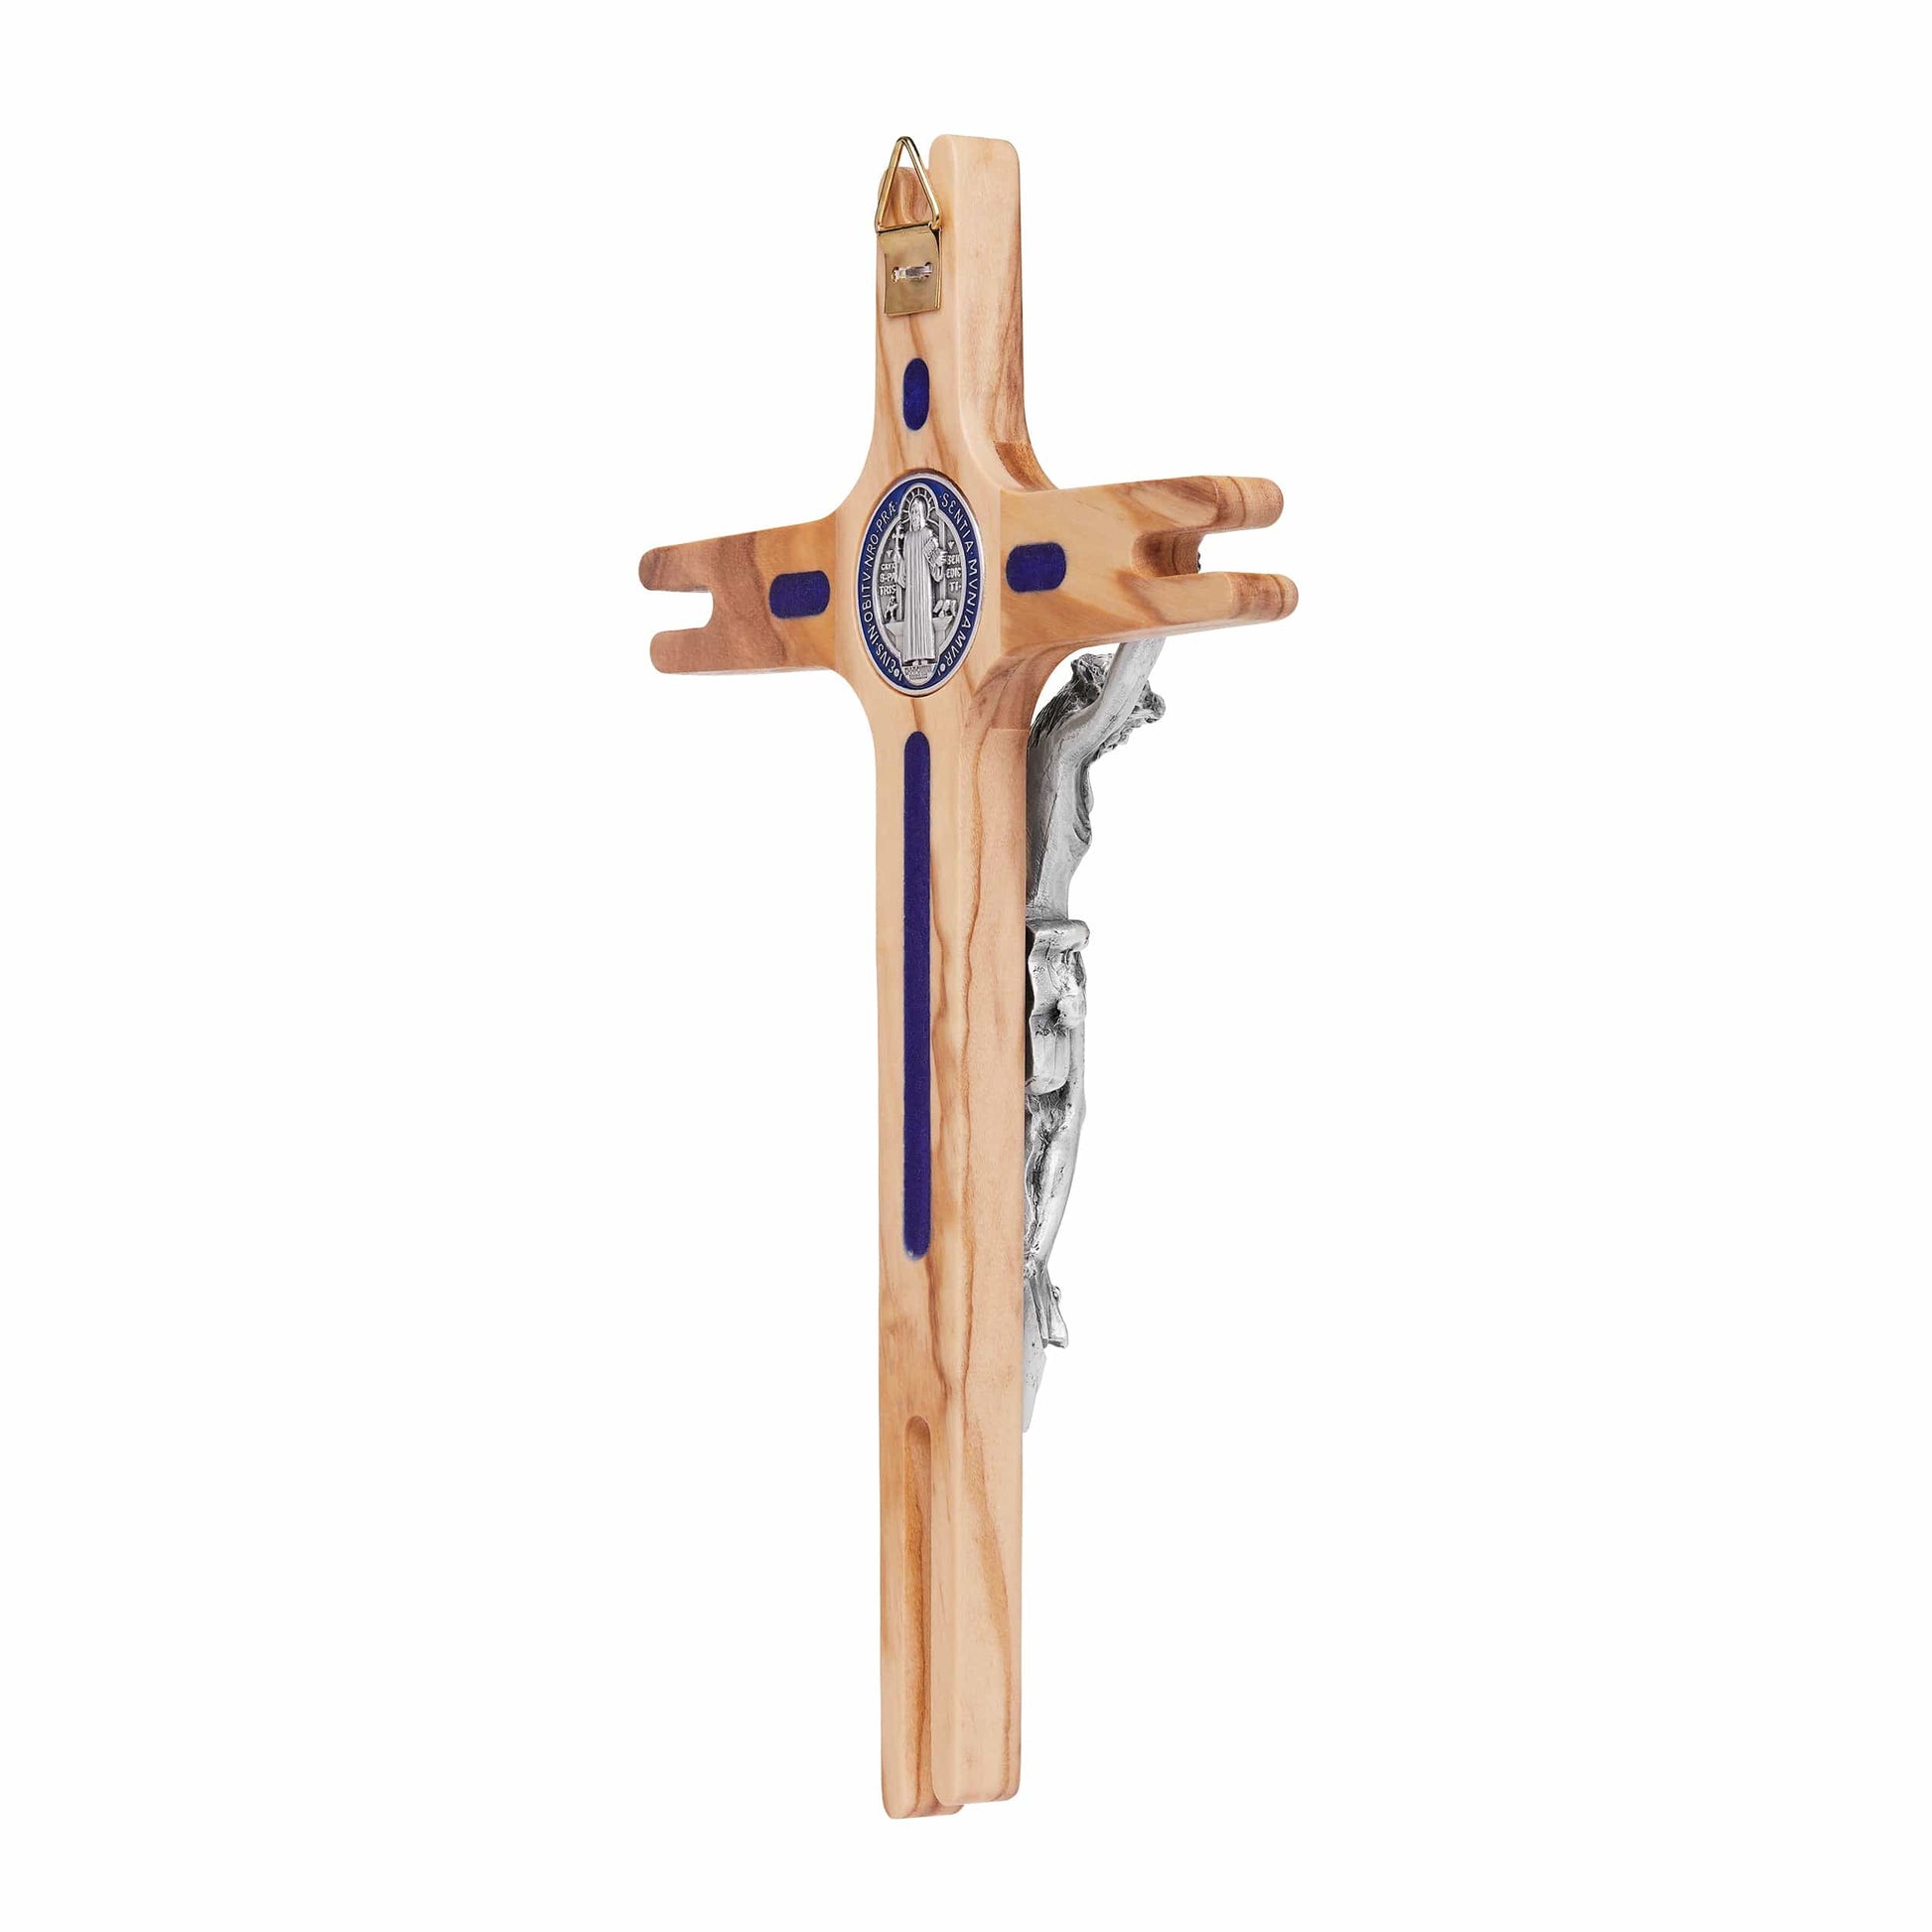 MONDO CATTOLICO 19 cm (7.48 in) Olive Wood St. Benedict Crucifix With Blue Enameled Medal